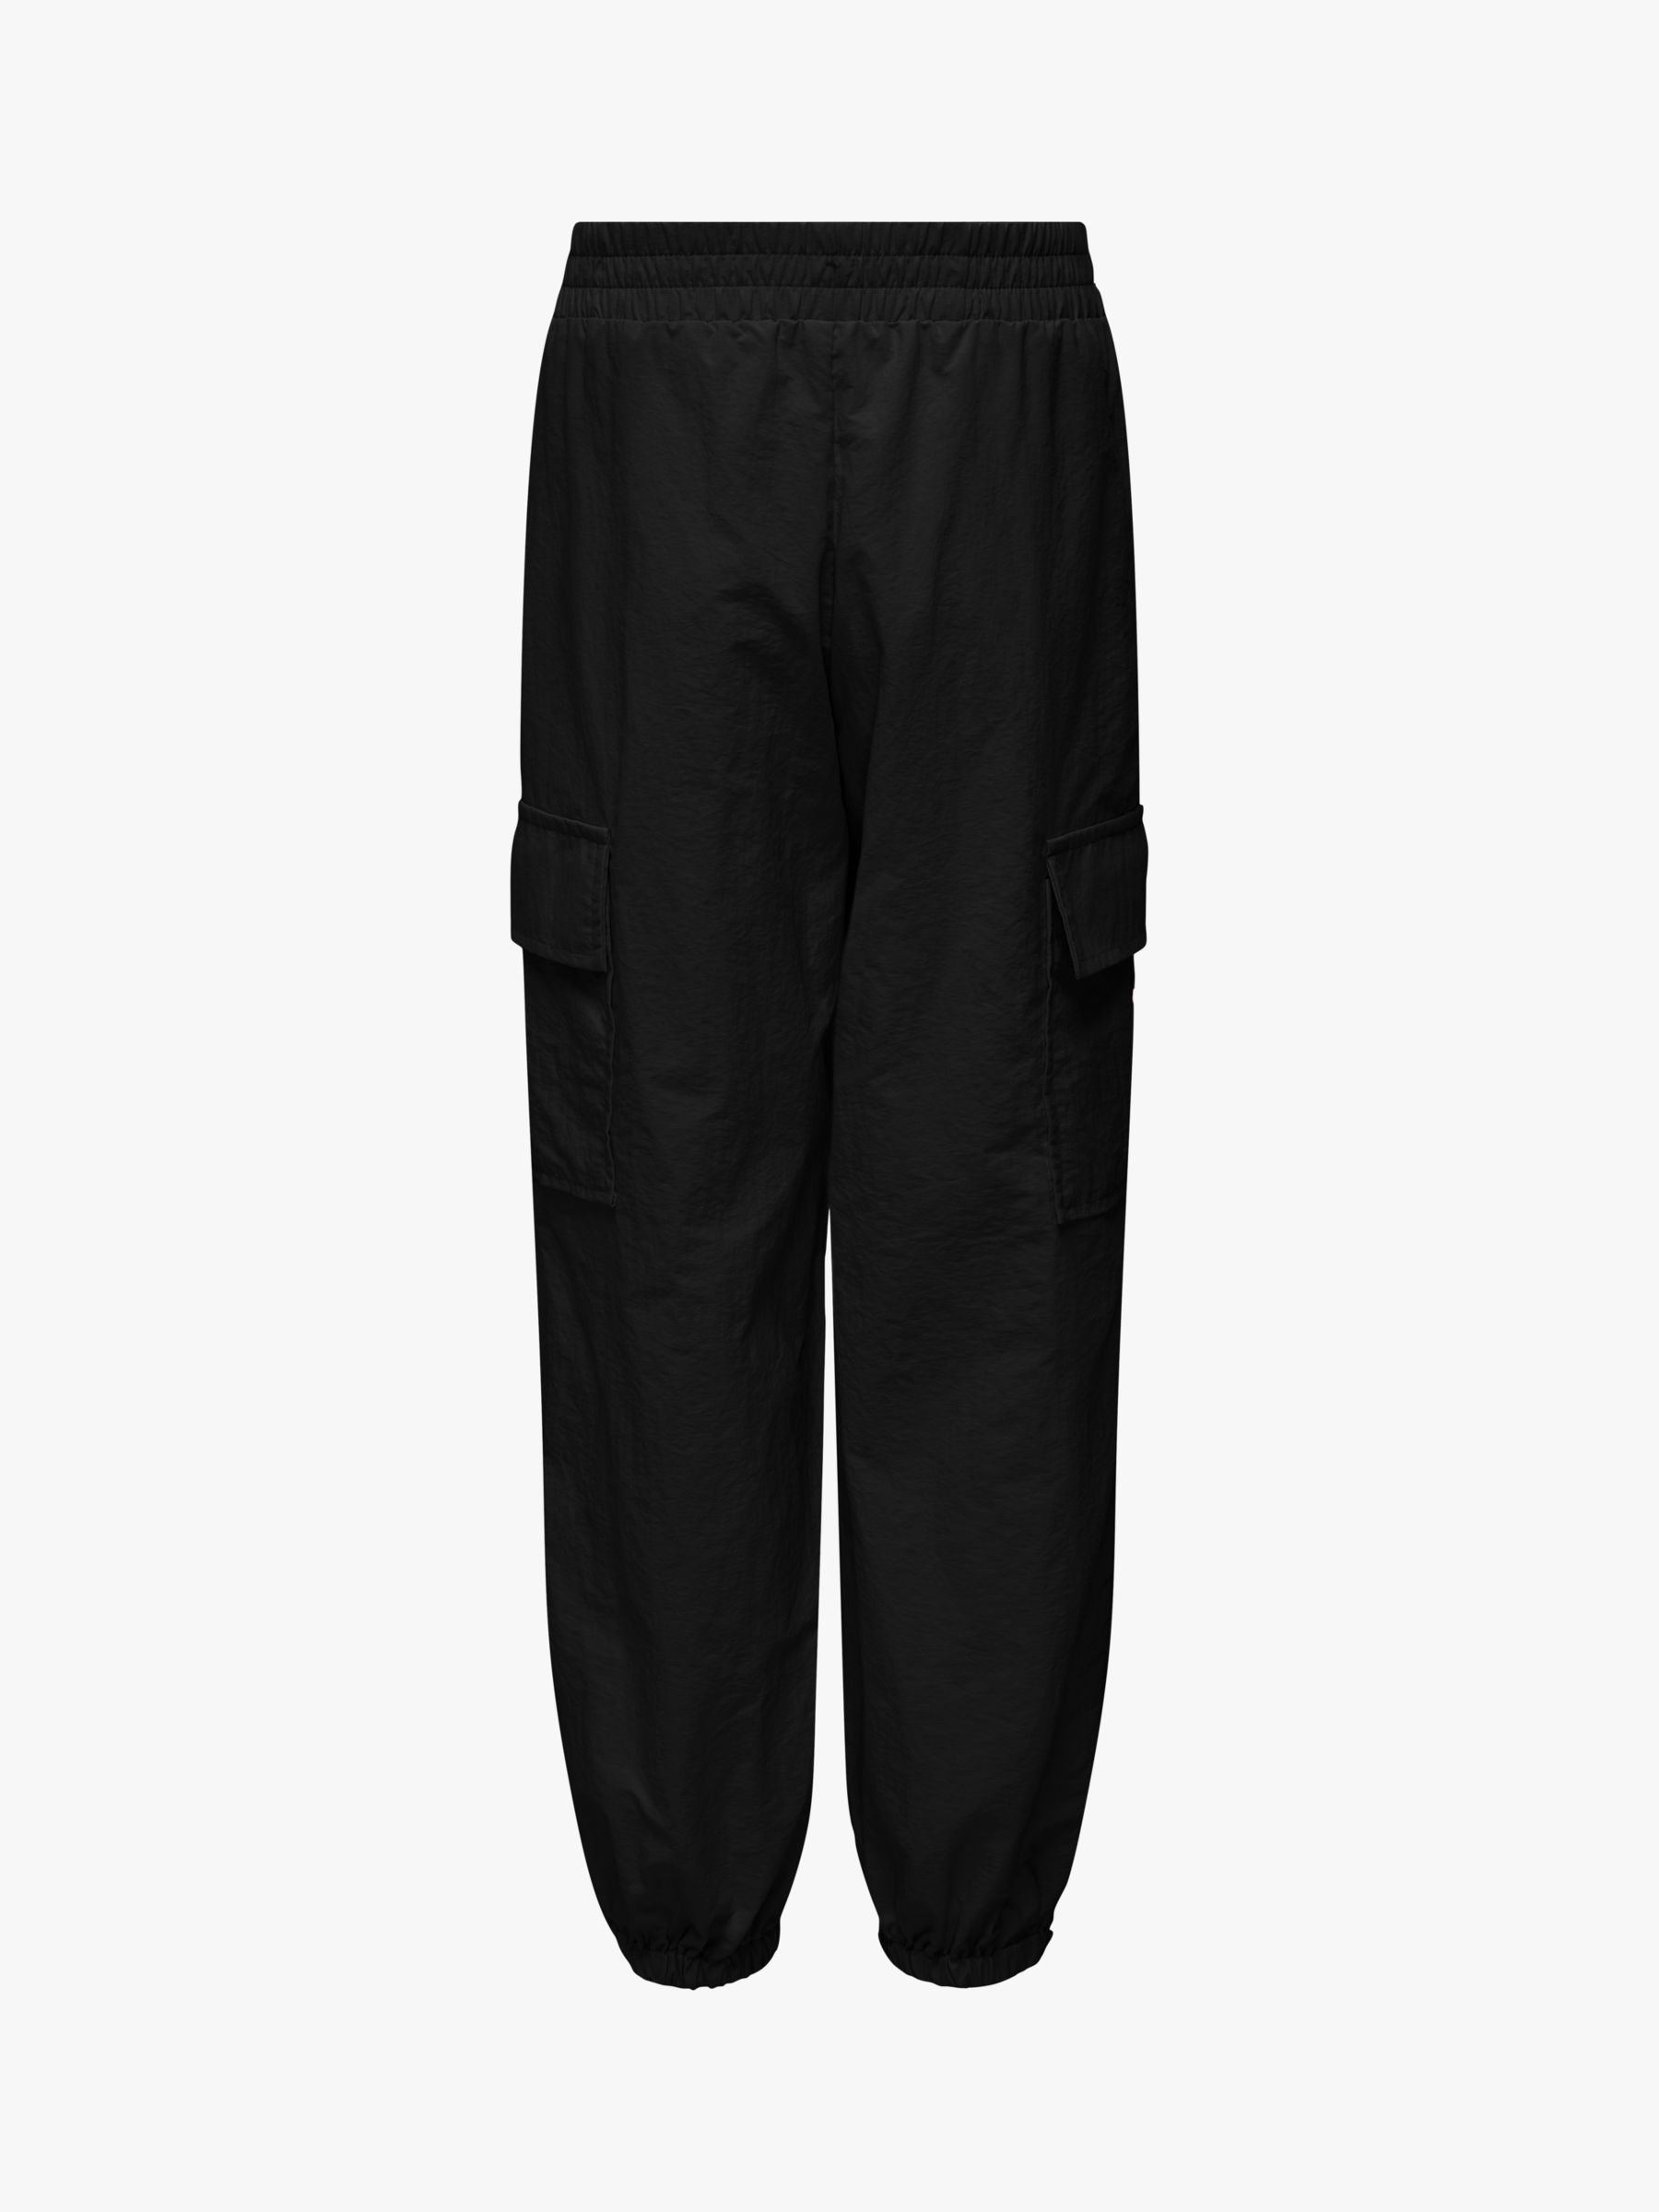 Kids ONLY Kids' Cargo Trousers, Black, 11 years